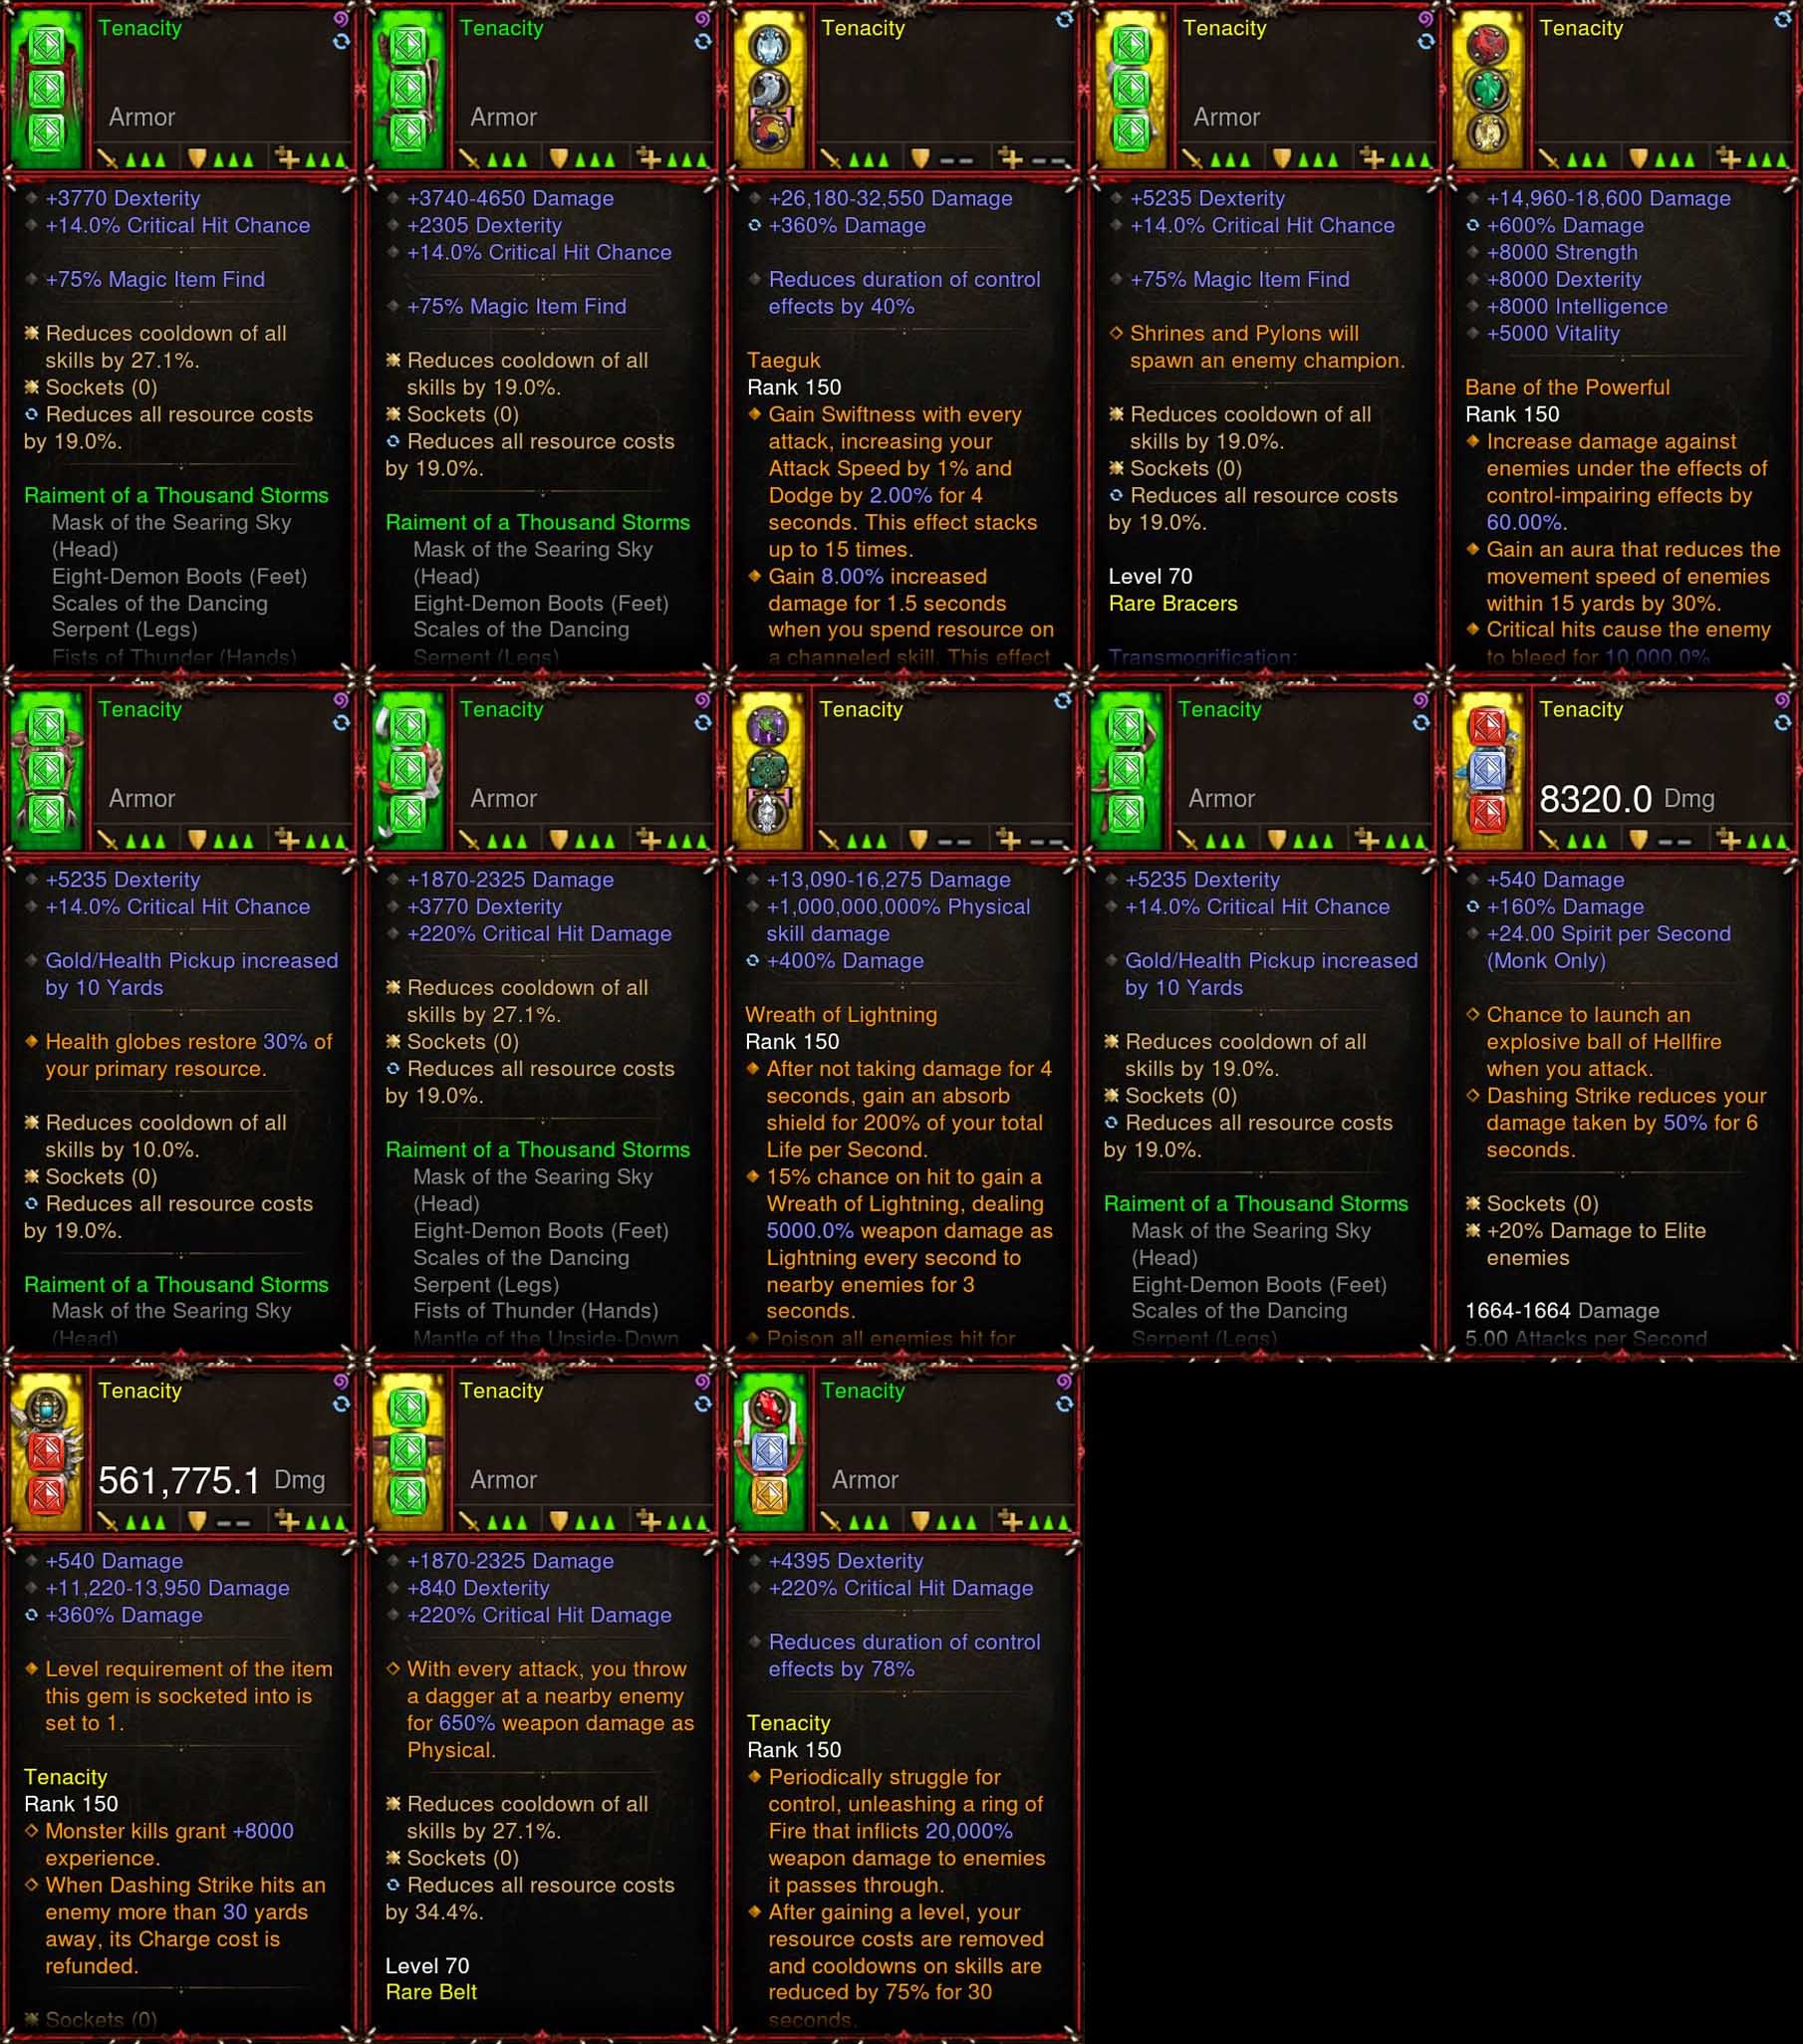 [Primal Ancient] [Quad DPS] Diablo 3 Immortal v5 SPEED Monk Thousand Storms gRift 150 (Magic Find, High CDR, RR) Tenacity Diablo 3 Mods ROS Seasonal and Non Seasonal Save Mod - Modded Items and Gear - Hacks - Cheats - Trainers for Playstation 4 - Playstation 5 - Nintendo Switch - Xbox One